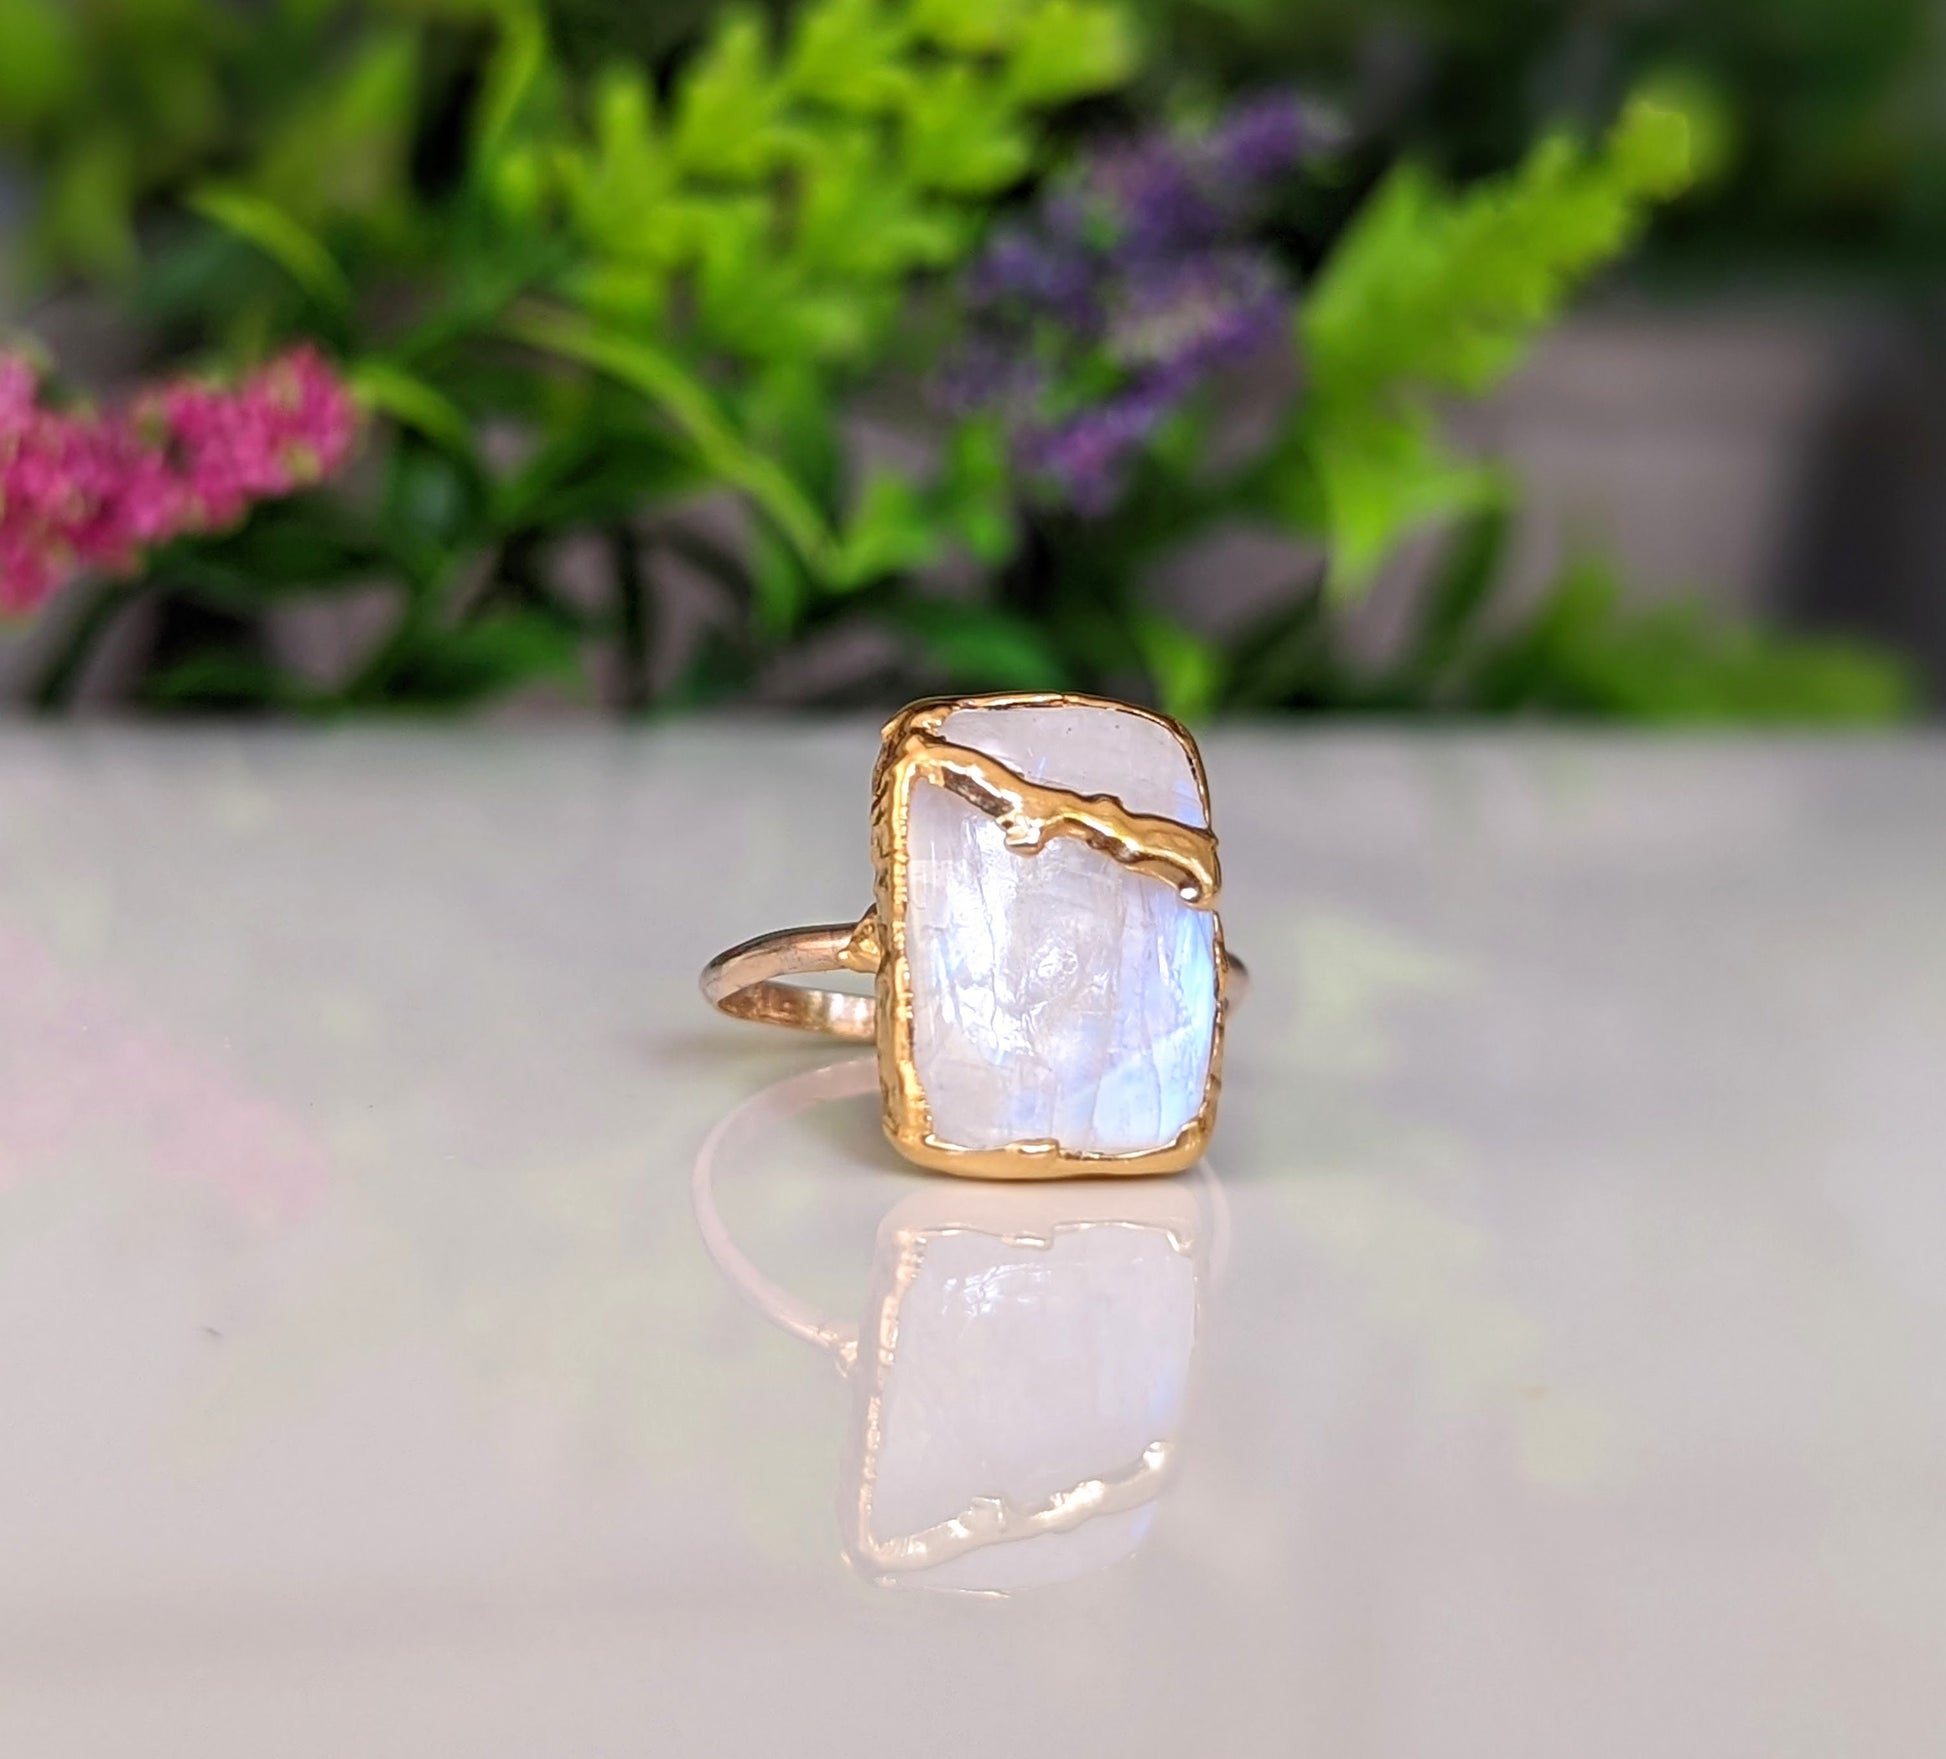 Natural Rainbow Moonstone ring in unique Kintsugi style 18k Gold setting